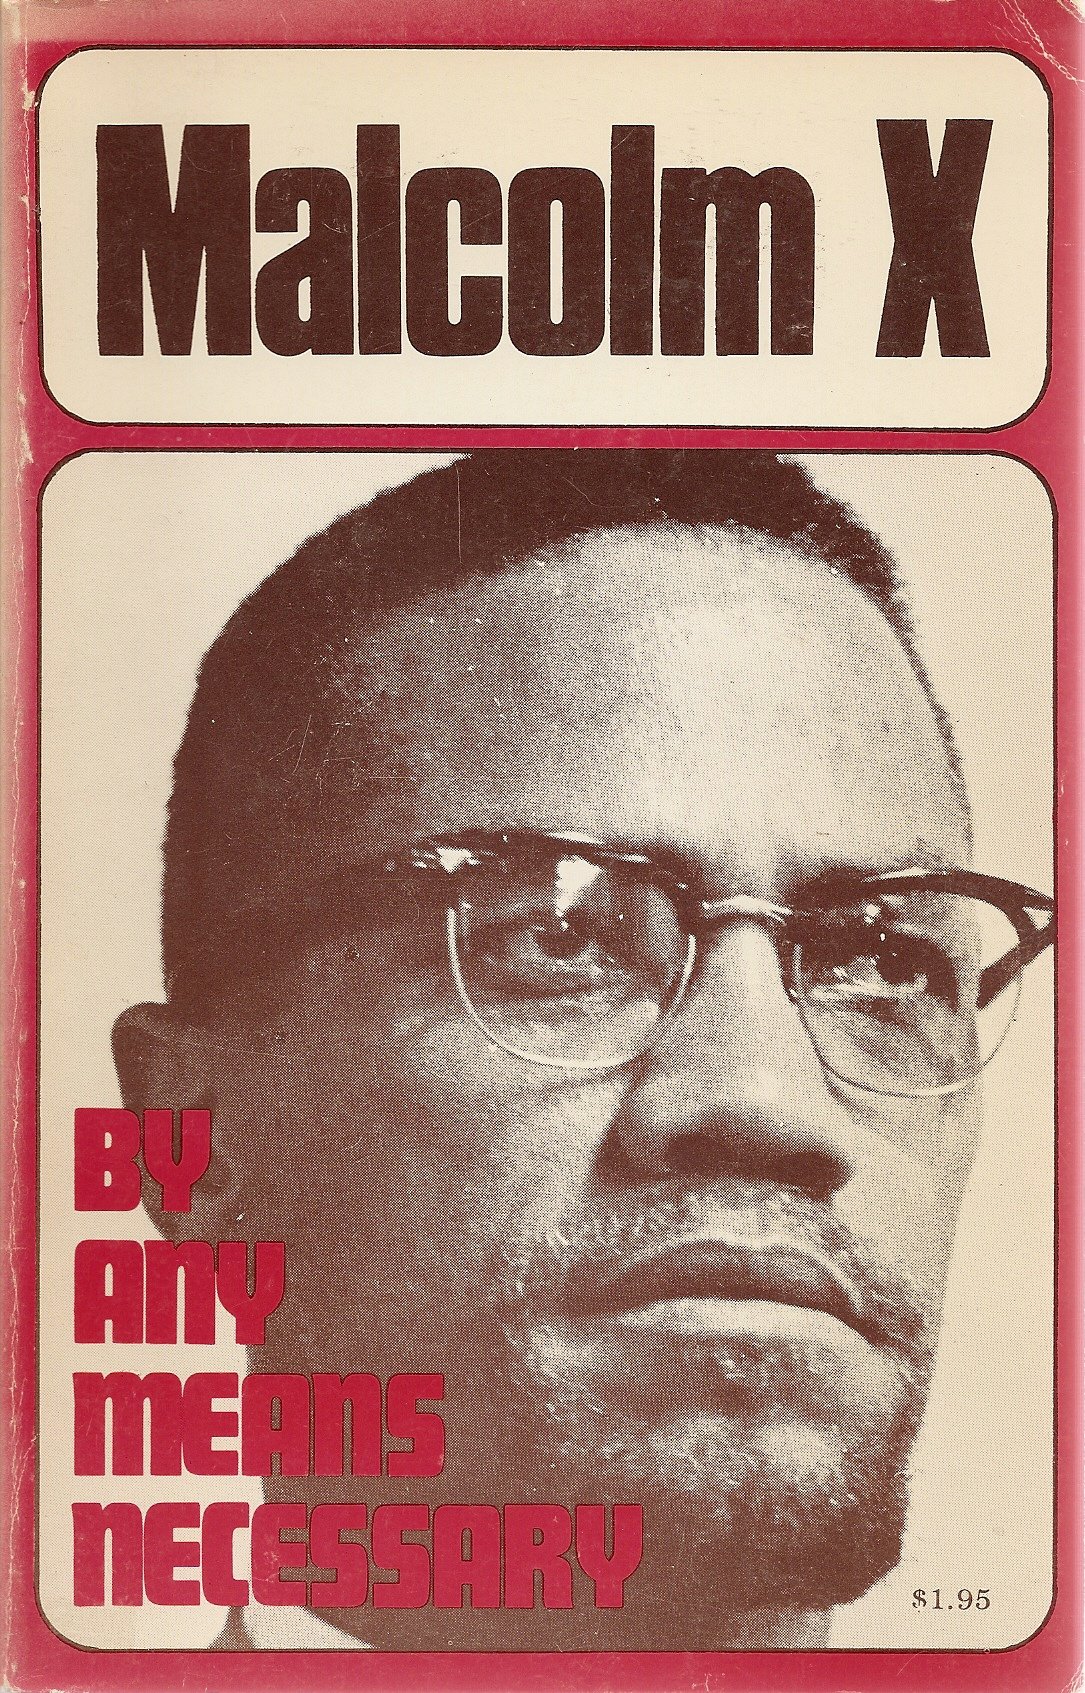 By Any Means Necessary: Speeches, Interviews, and a Letter by Malcolm X